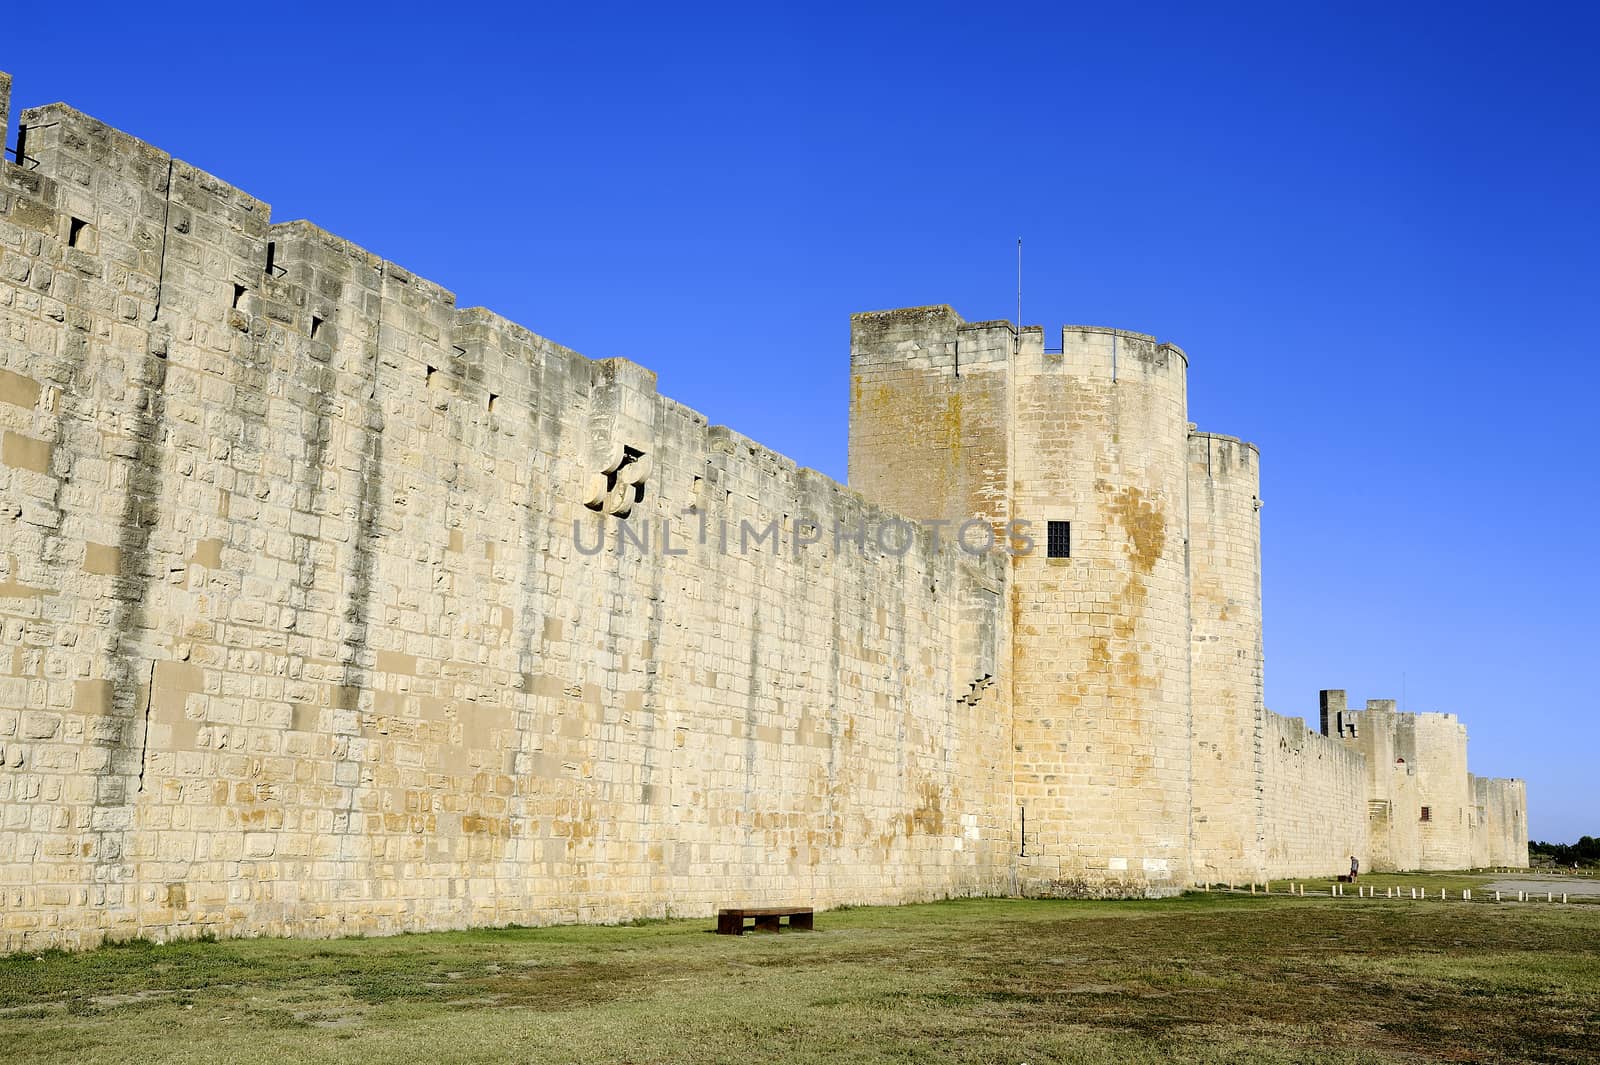 the ramparts of Aigues-Mortes medieval walled city in the Camargue in the south-east of France.